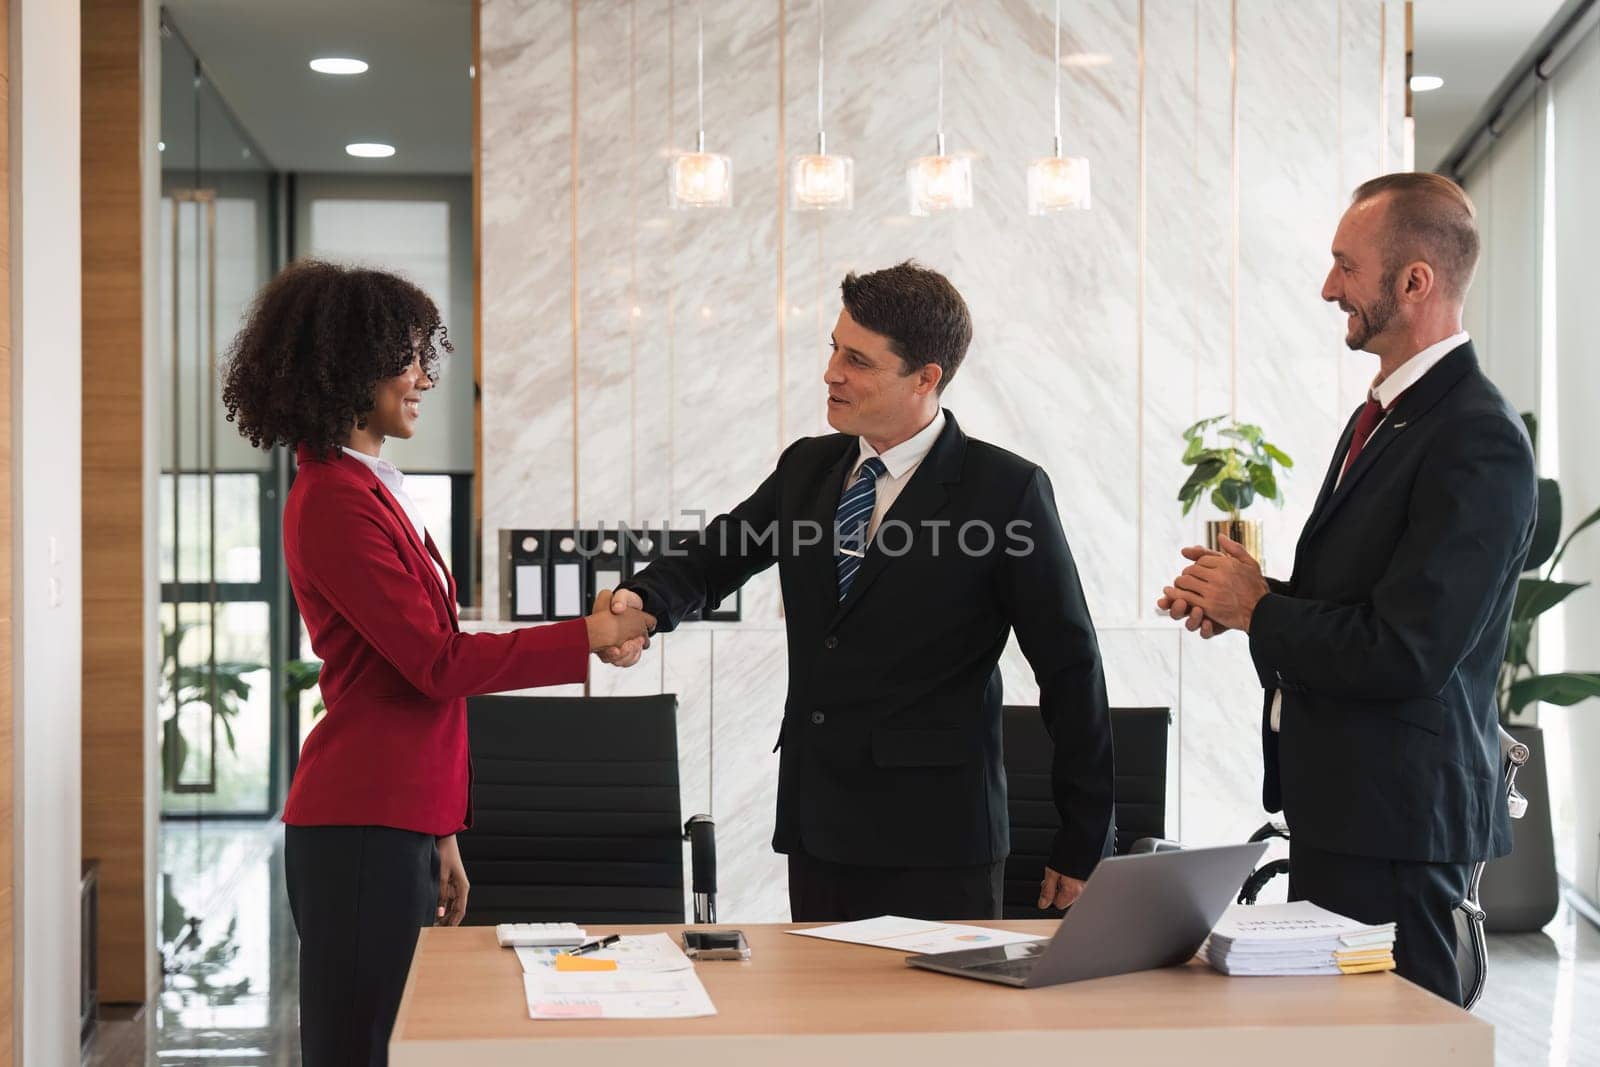 business holding hands, businessmen are agreeing on business together and shaking hands after a successful negotiation. Handshaking is a or congratulation.